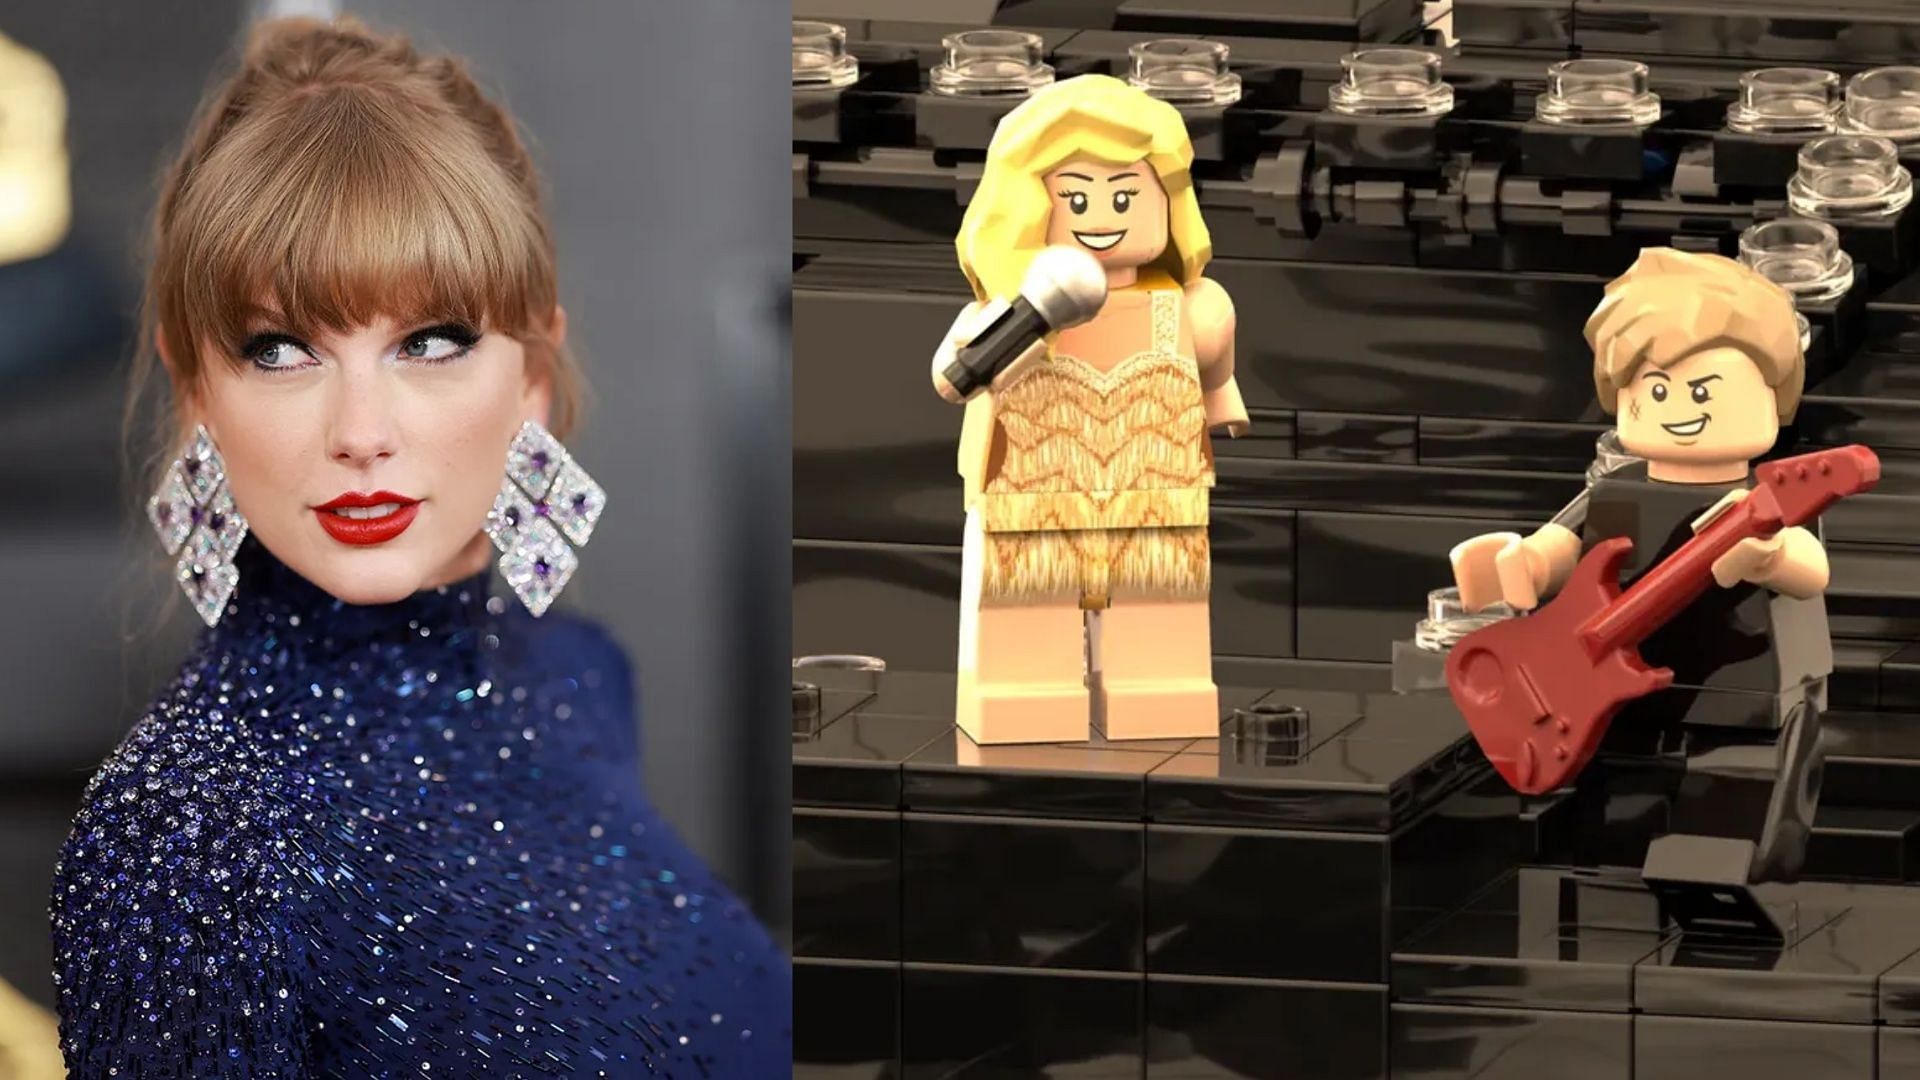 Needs to happen: Taylor Swift Lego Lover House idea receives